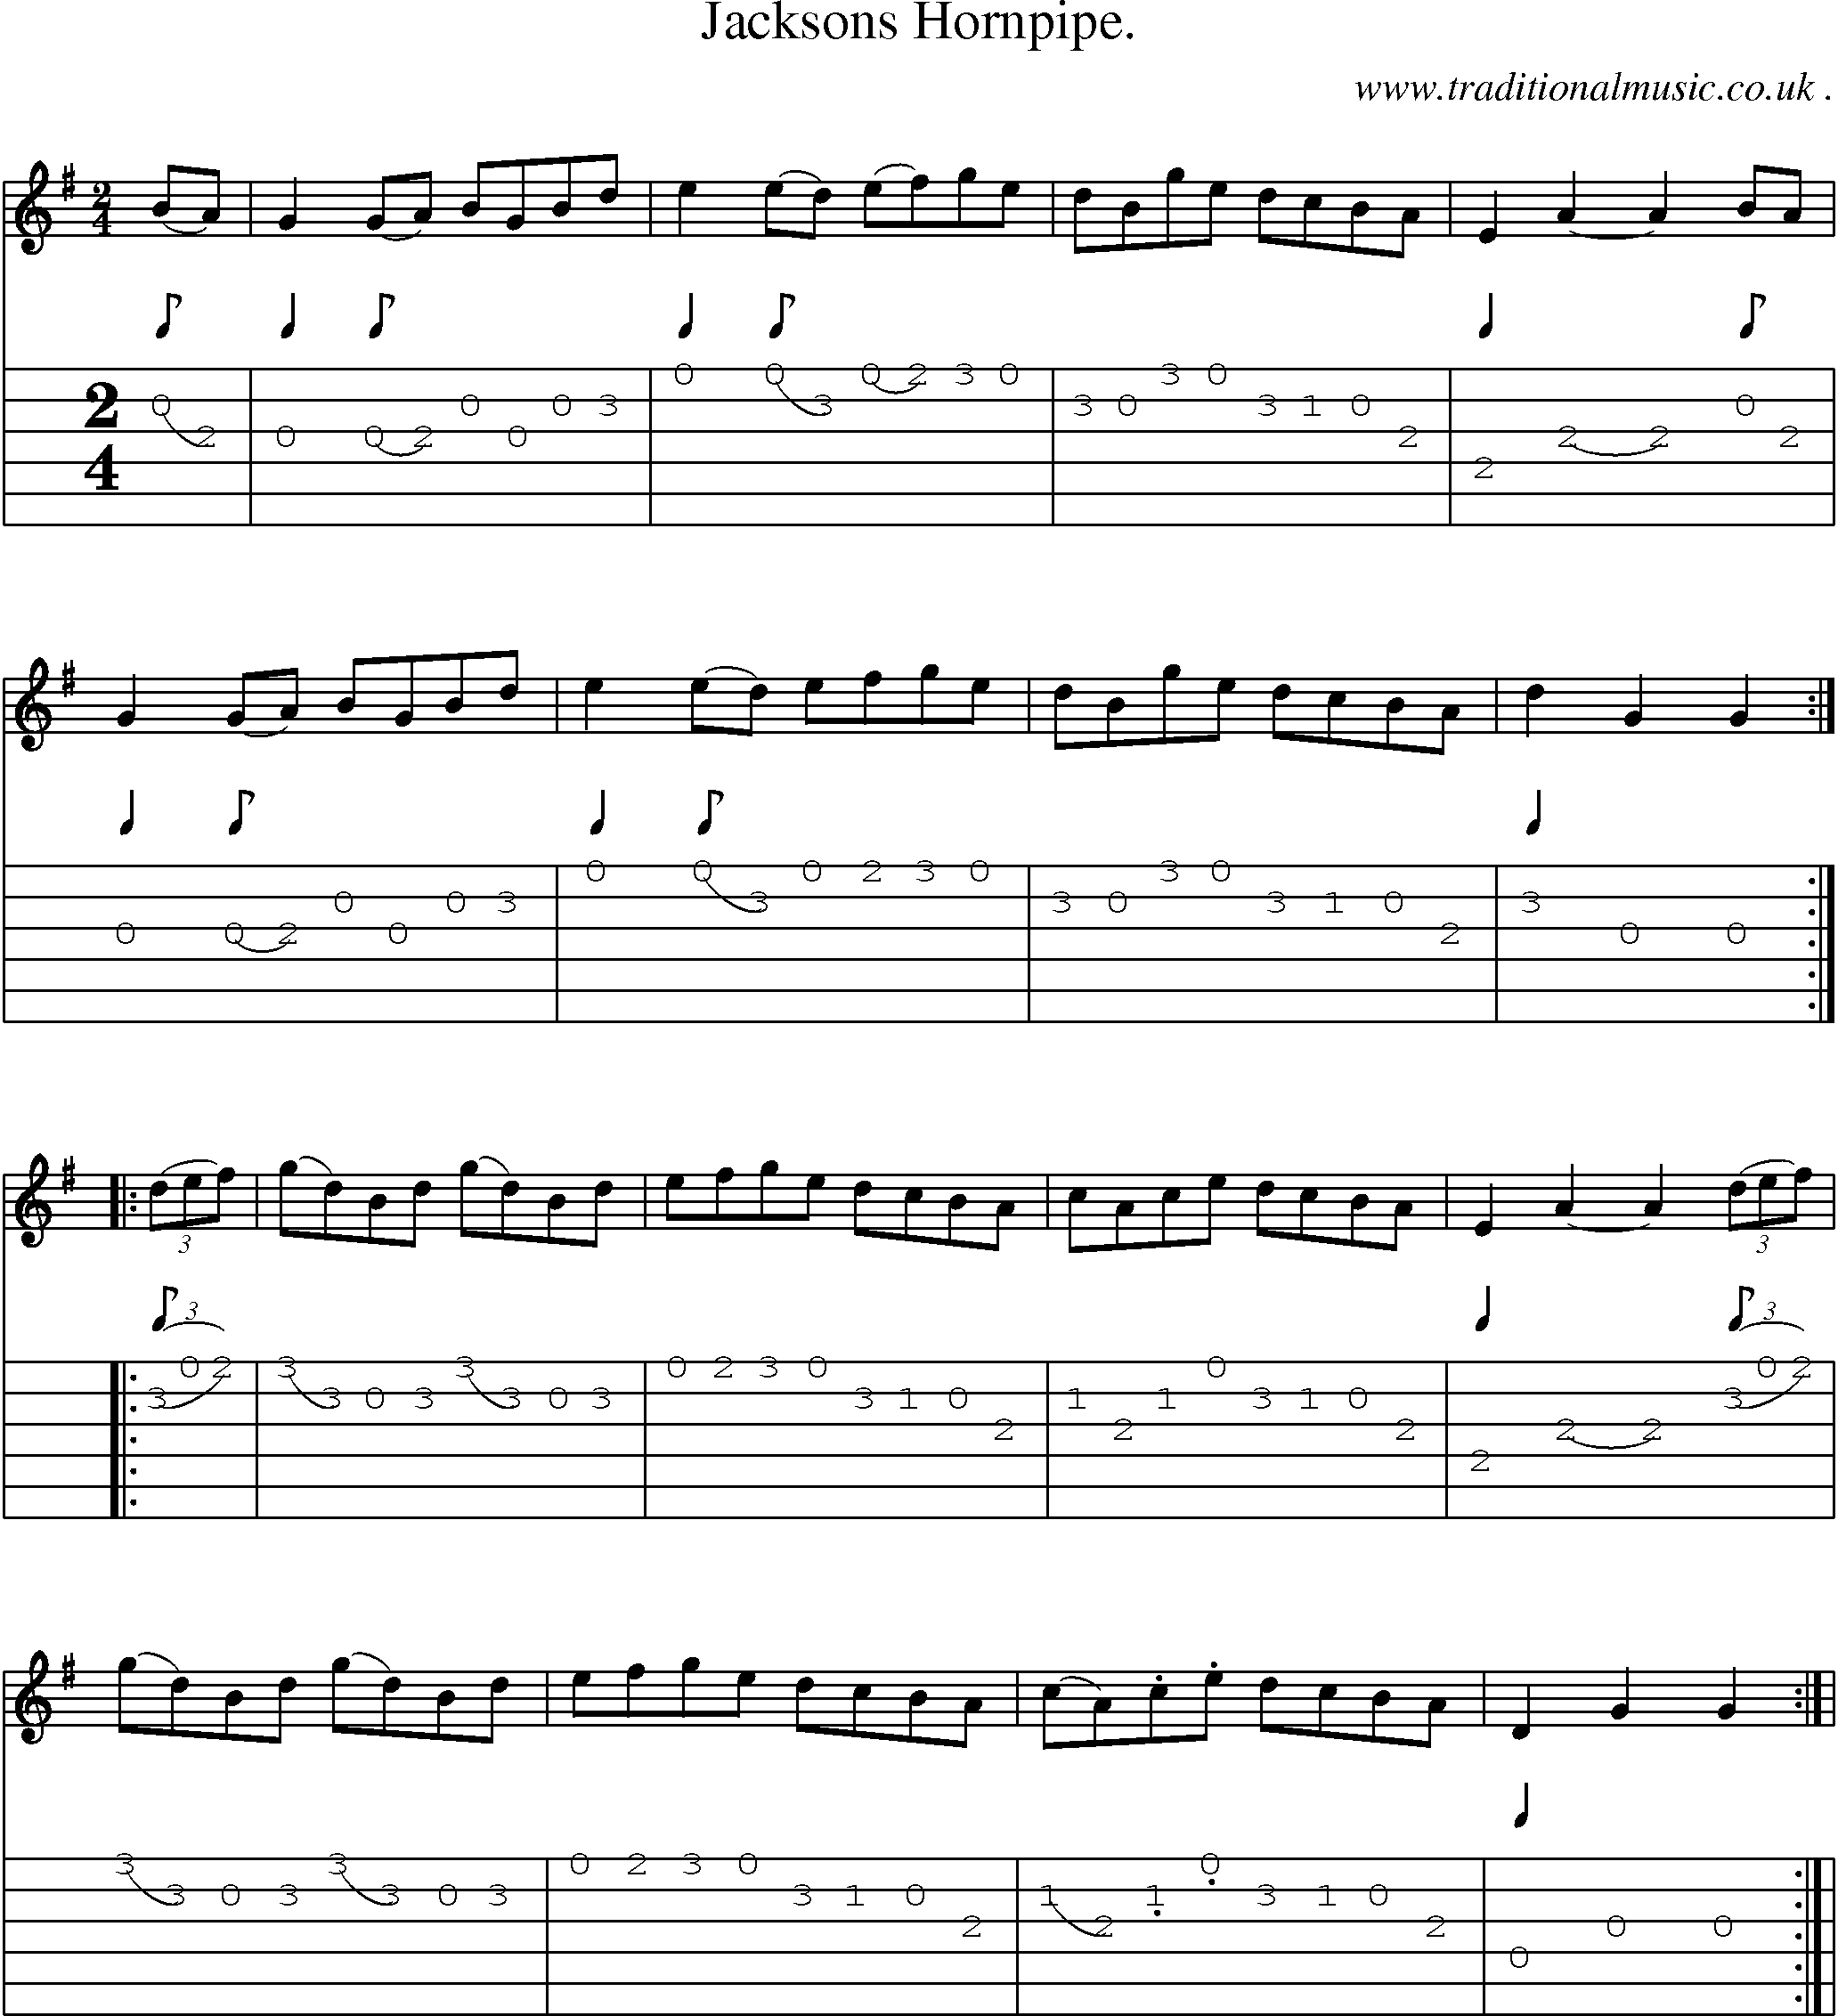 Sheet-Music and Guitar Tabs for Jacksons Hornpipe